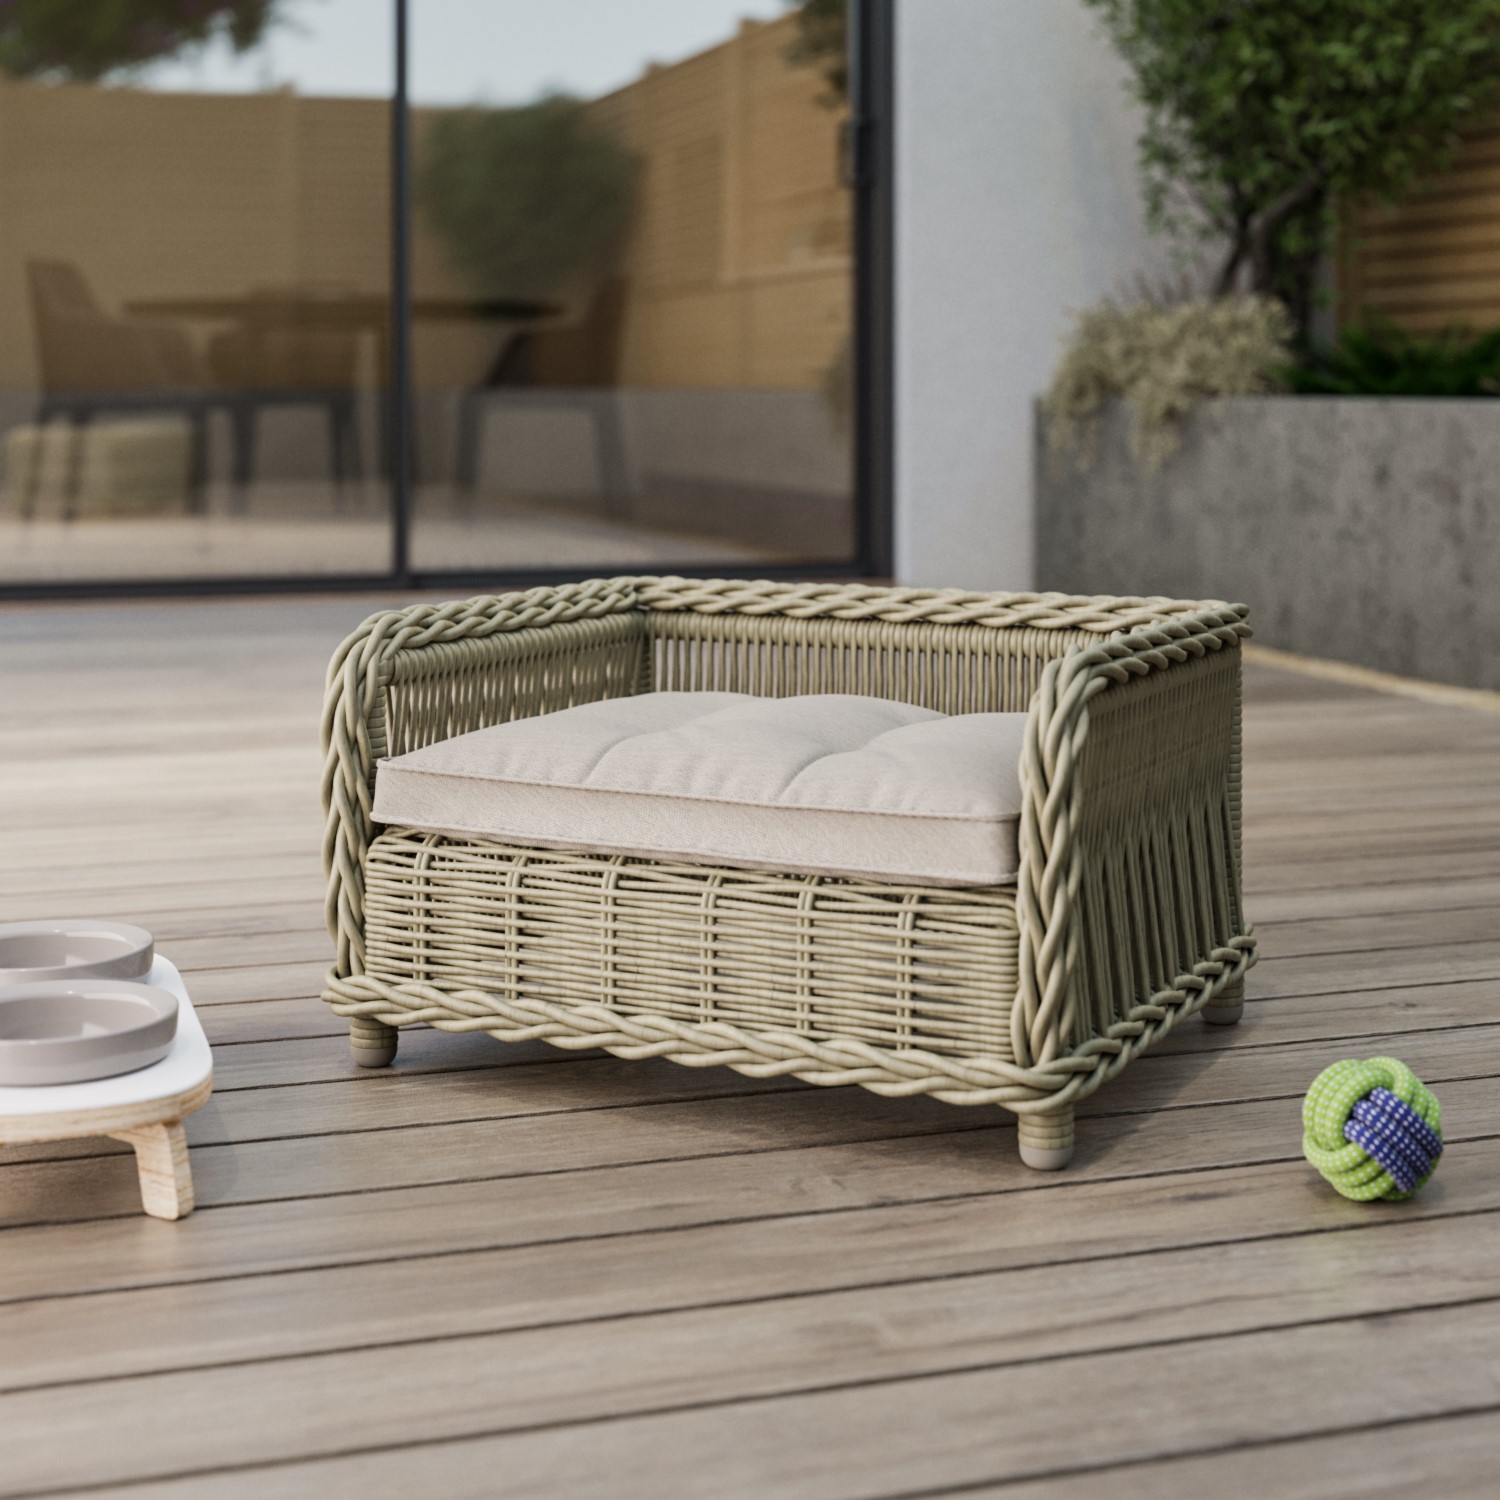 Photo of Small rattan outdoor pet bed